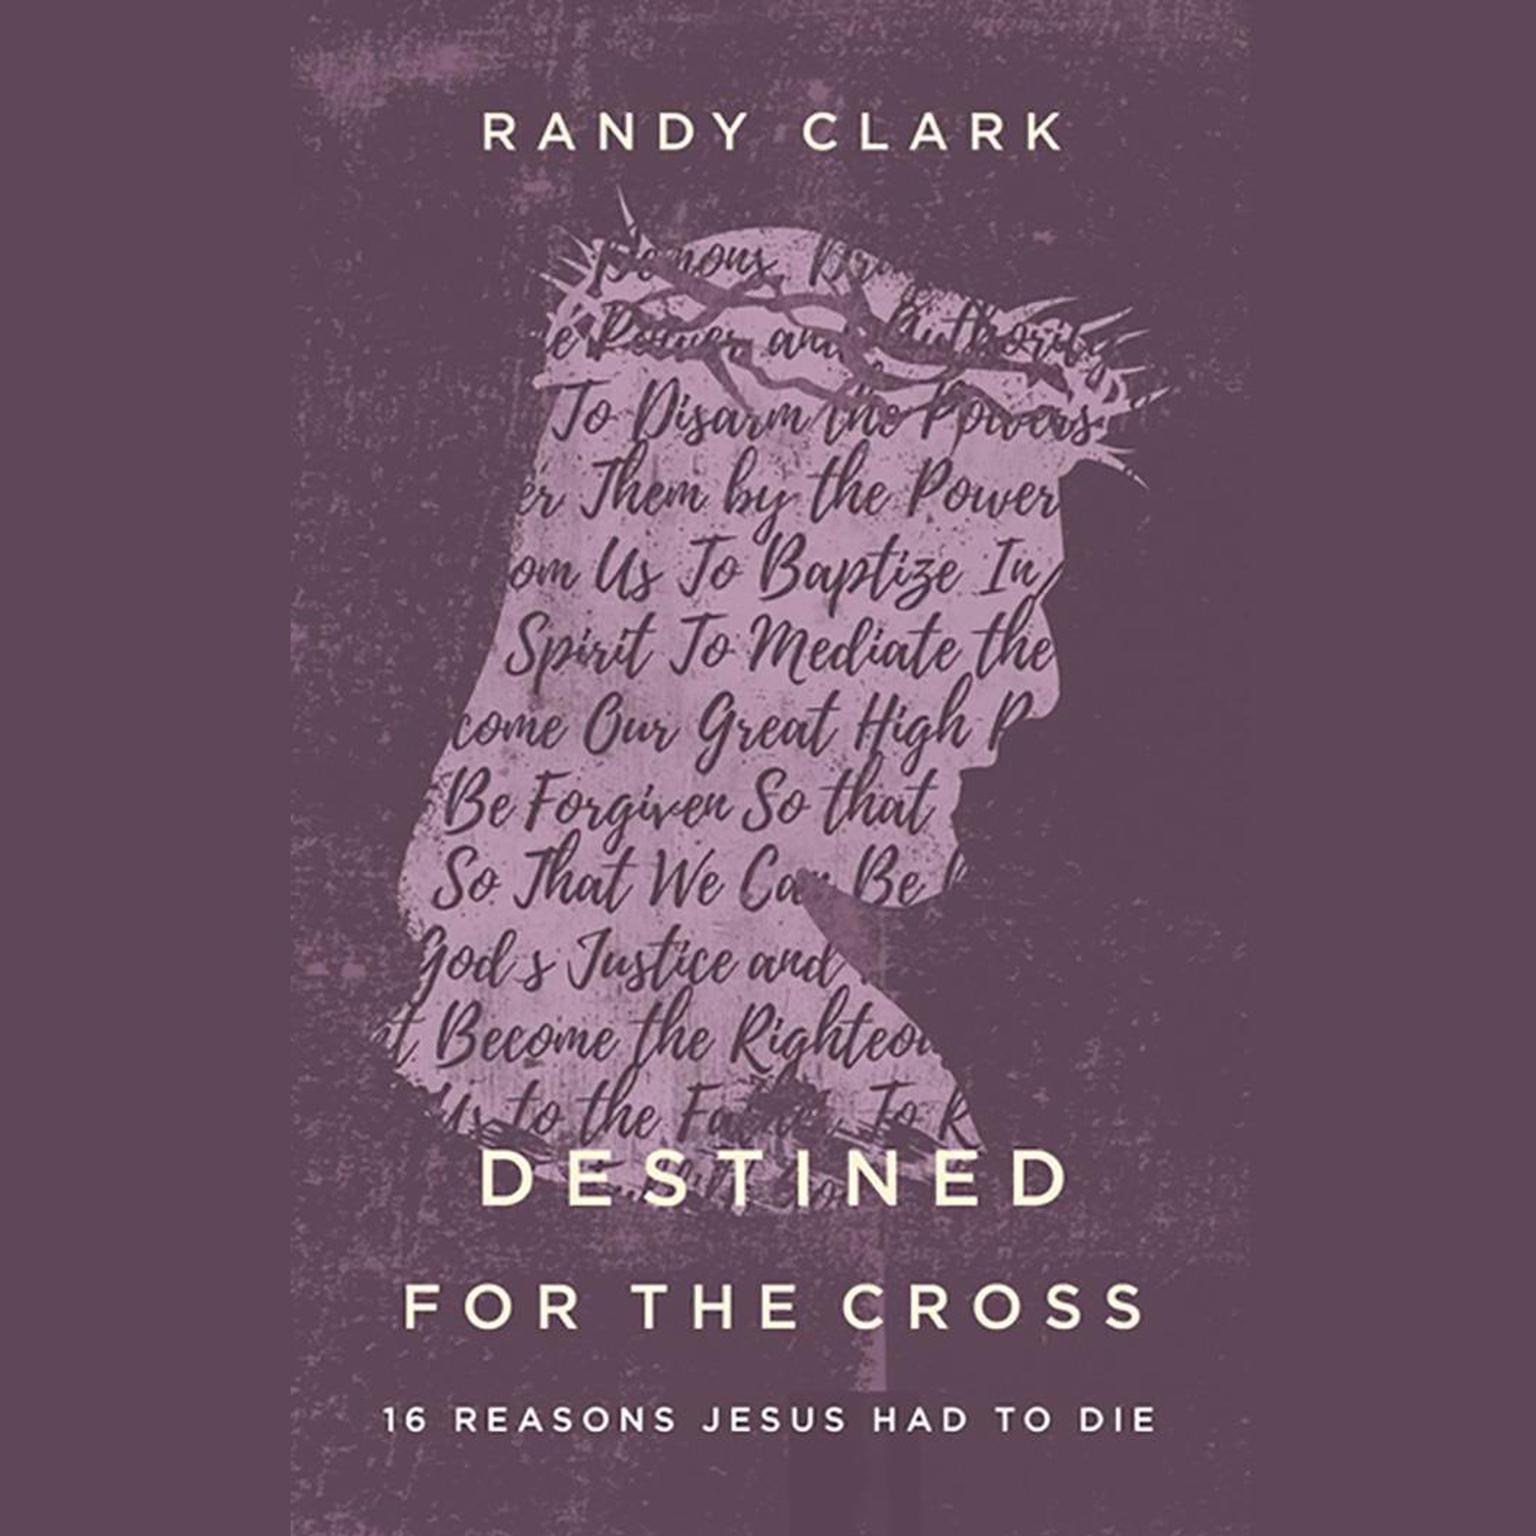 Destined for the Cross: 16 Reasons Jesus Had to Die Audiobook, by Randy Clark